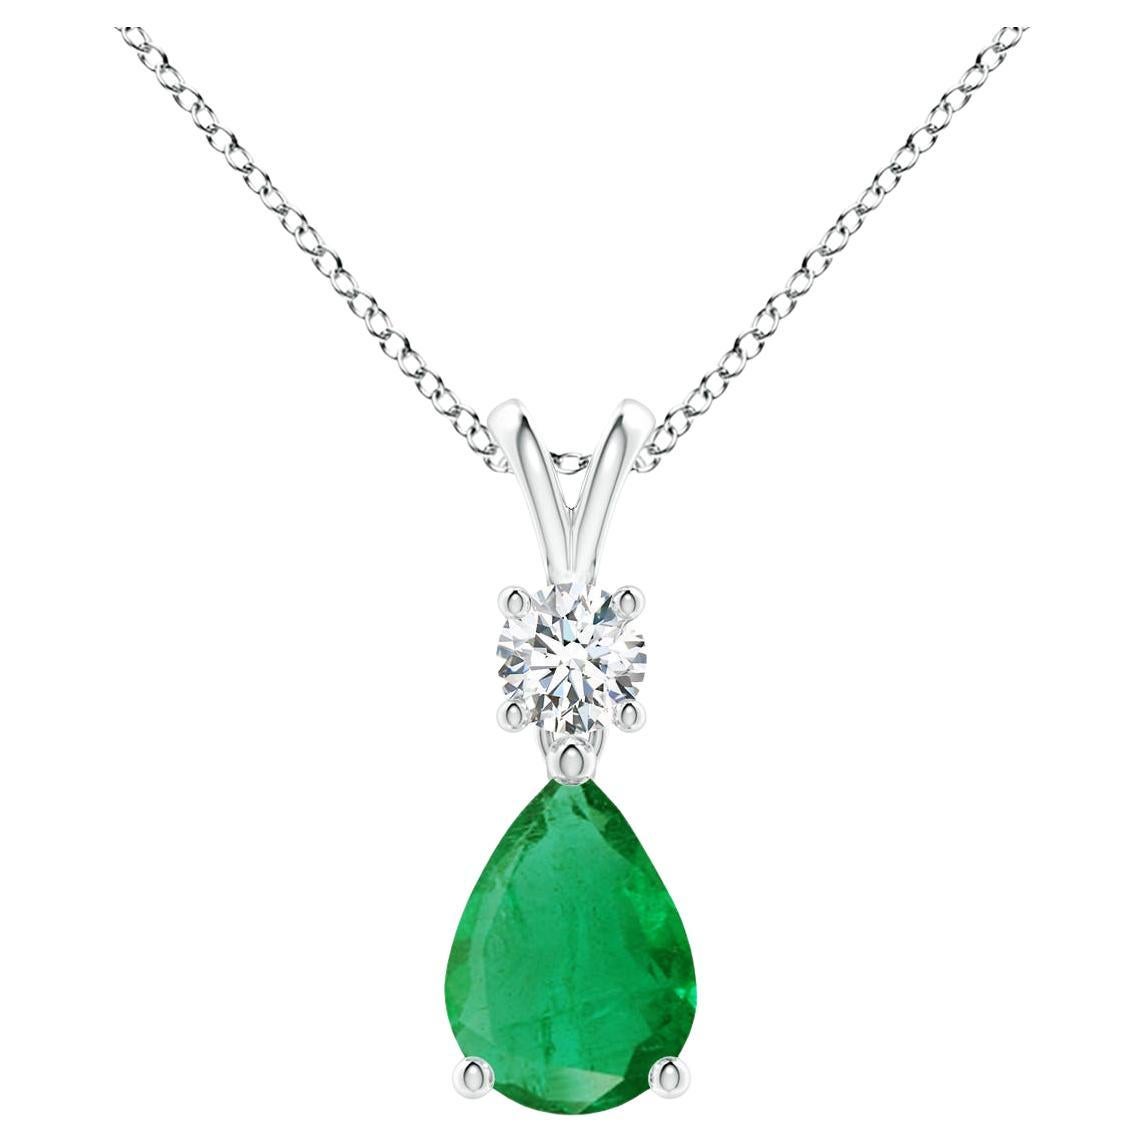 Natural Pear-Shaped Emerald V-Bale Pendant in 14K White Gold Size-7x5mm